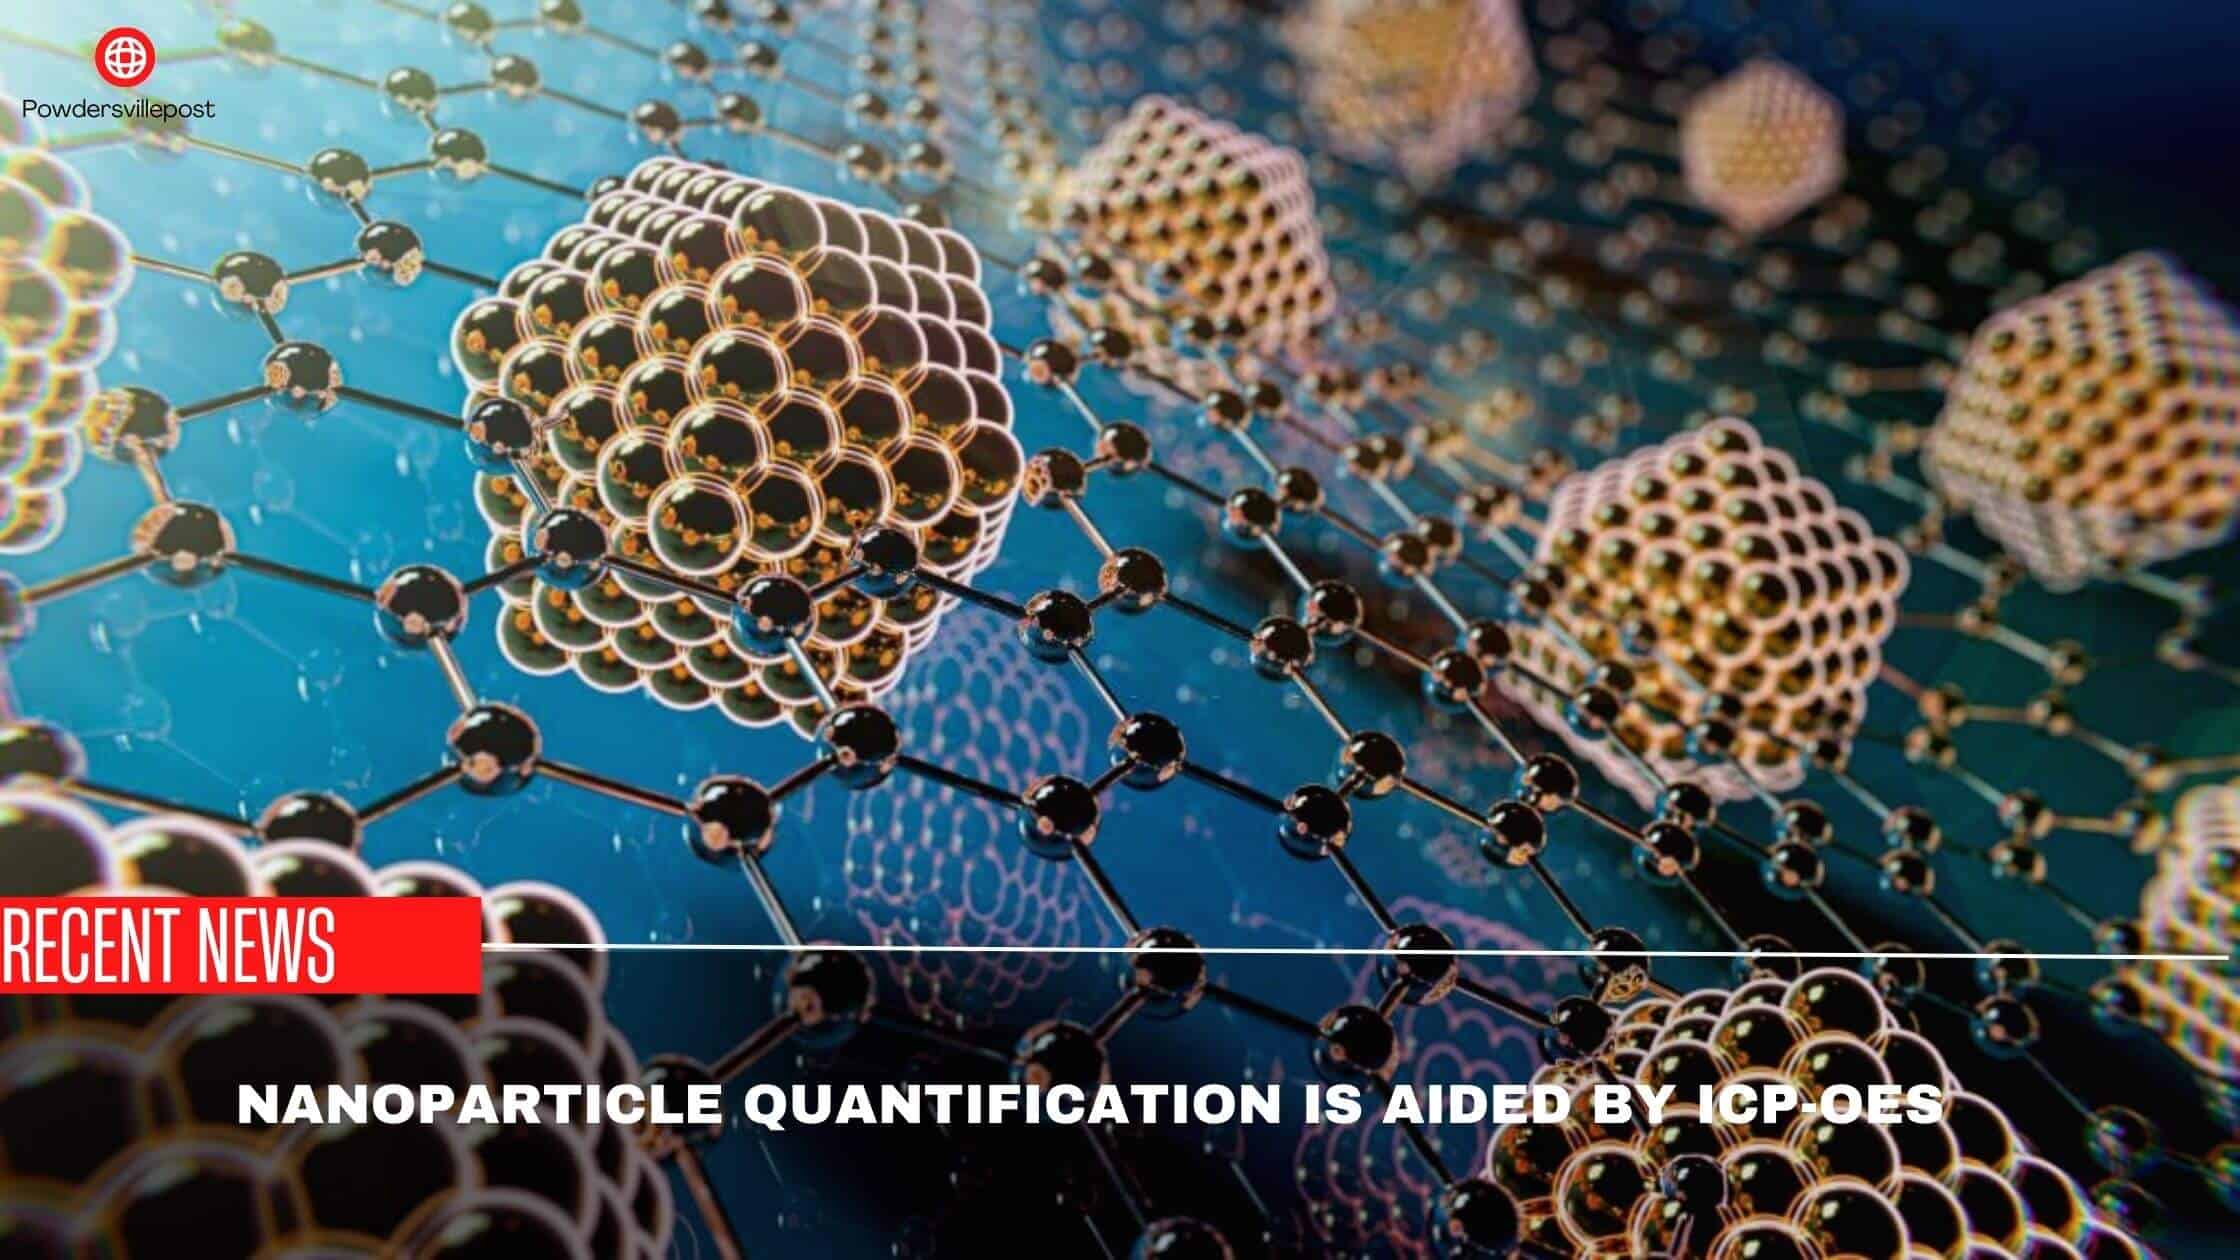 Nanoparticle Quantification Is Aided By ICP-OES